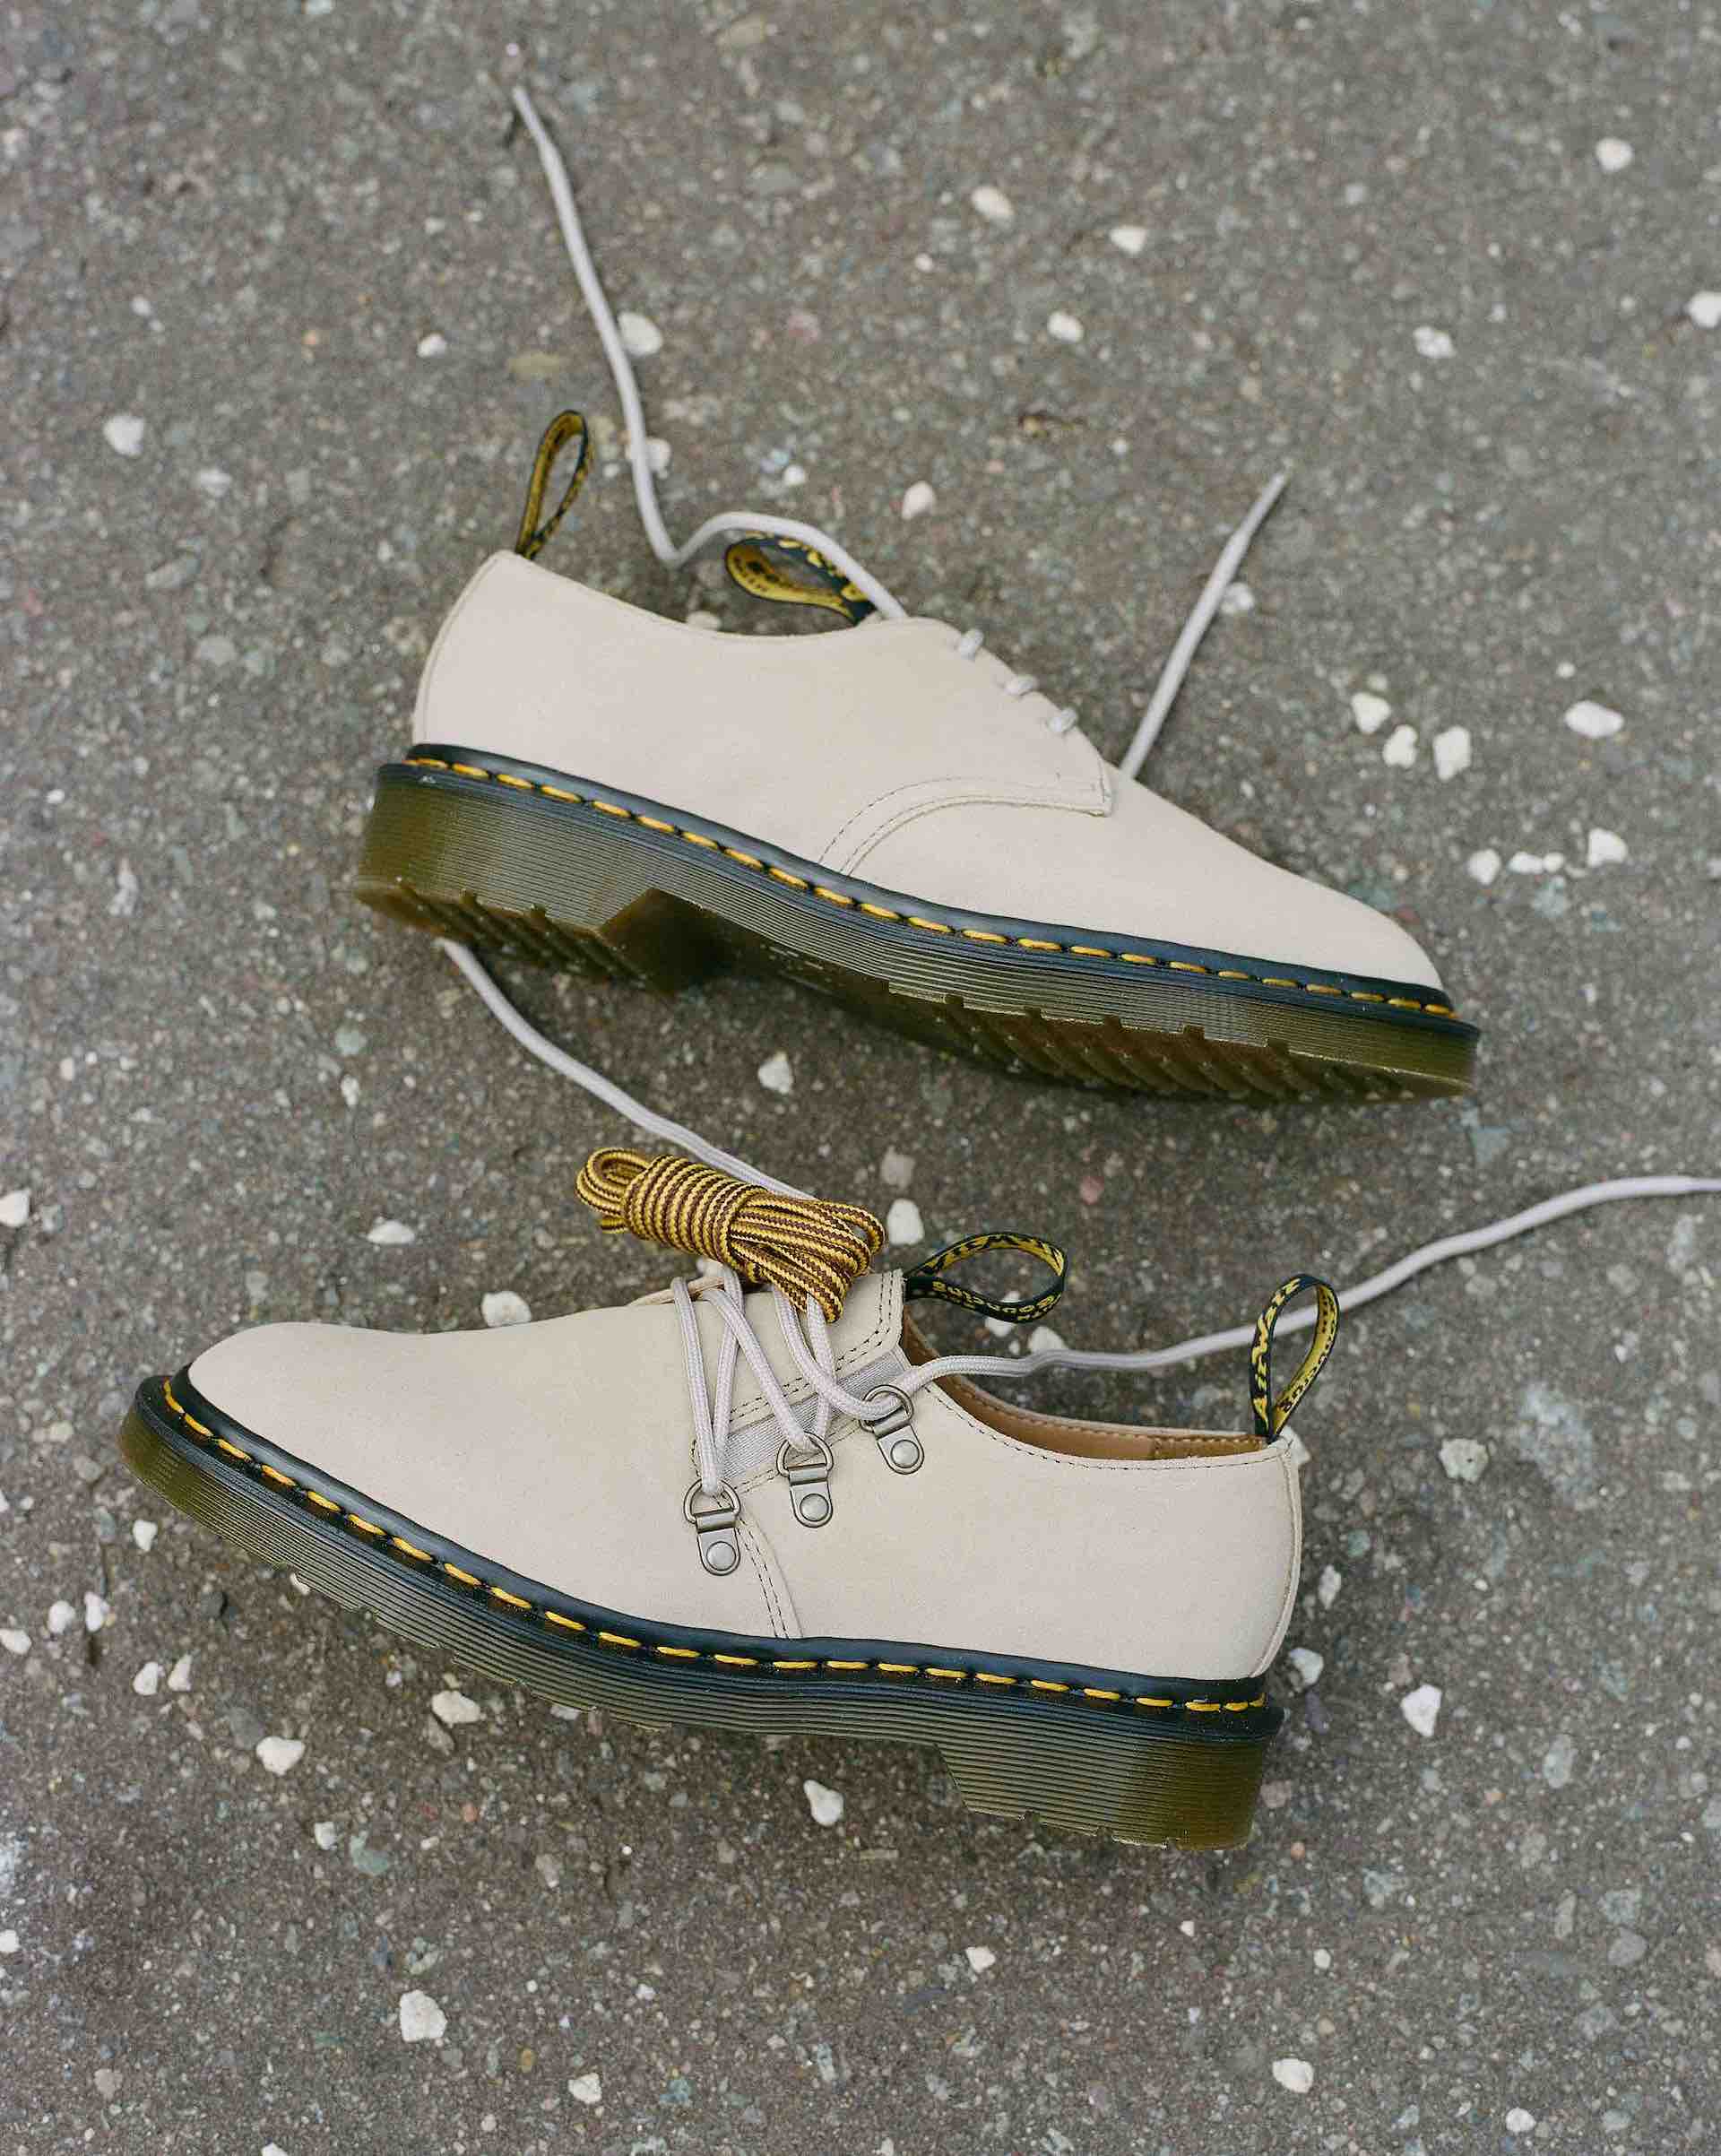 ＜DR. MARTENS × ENGINEERED GARMENTS＞MADE IN ENGLANDの「1461」3ホールシューズ2型が登場 fashion220901-drmartens-01